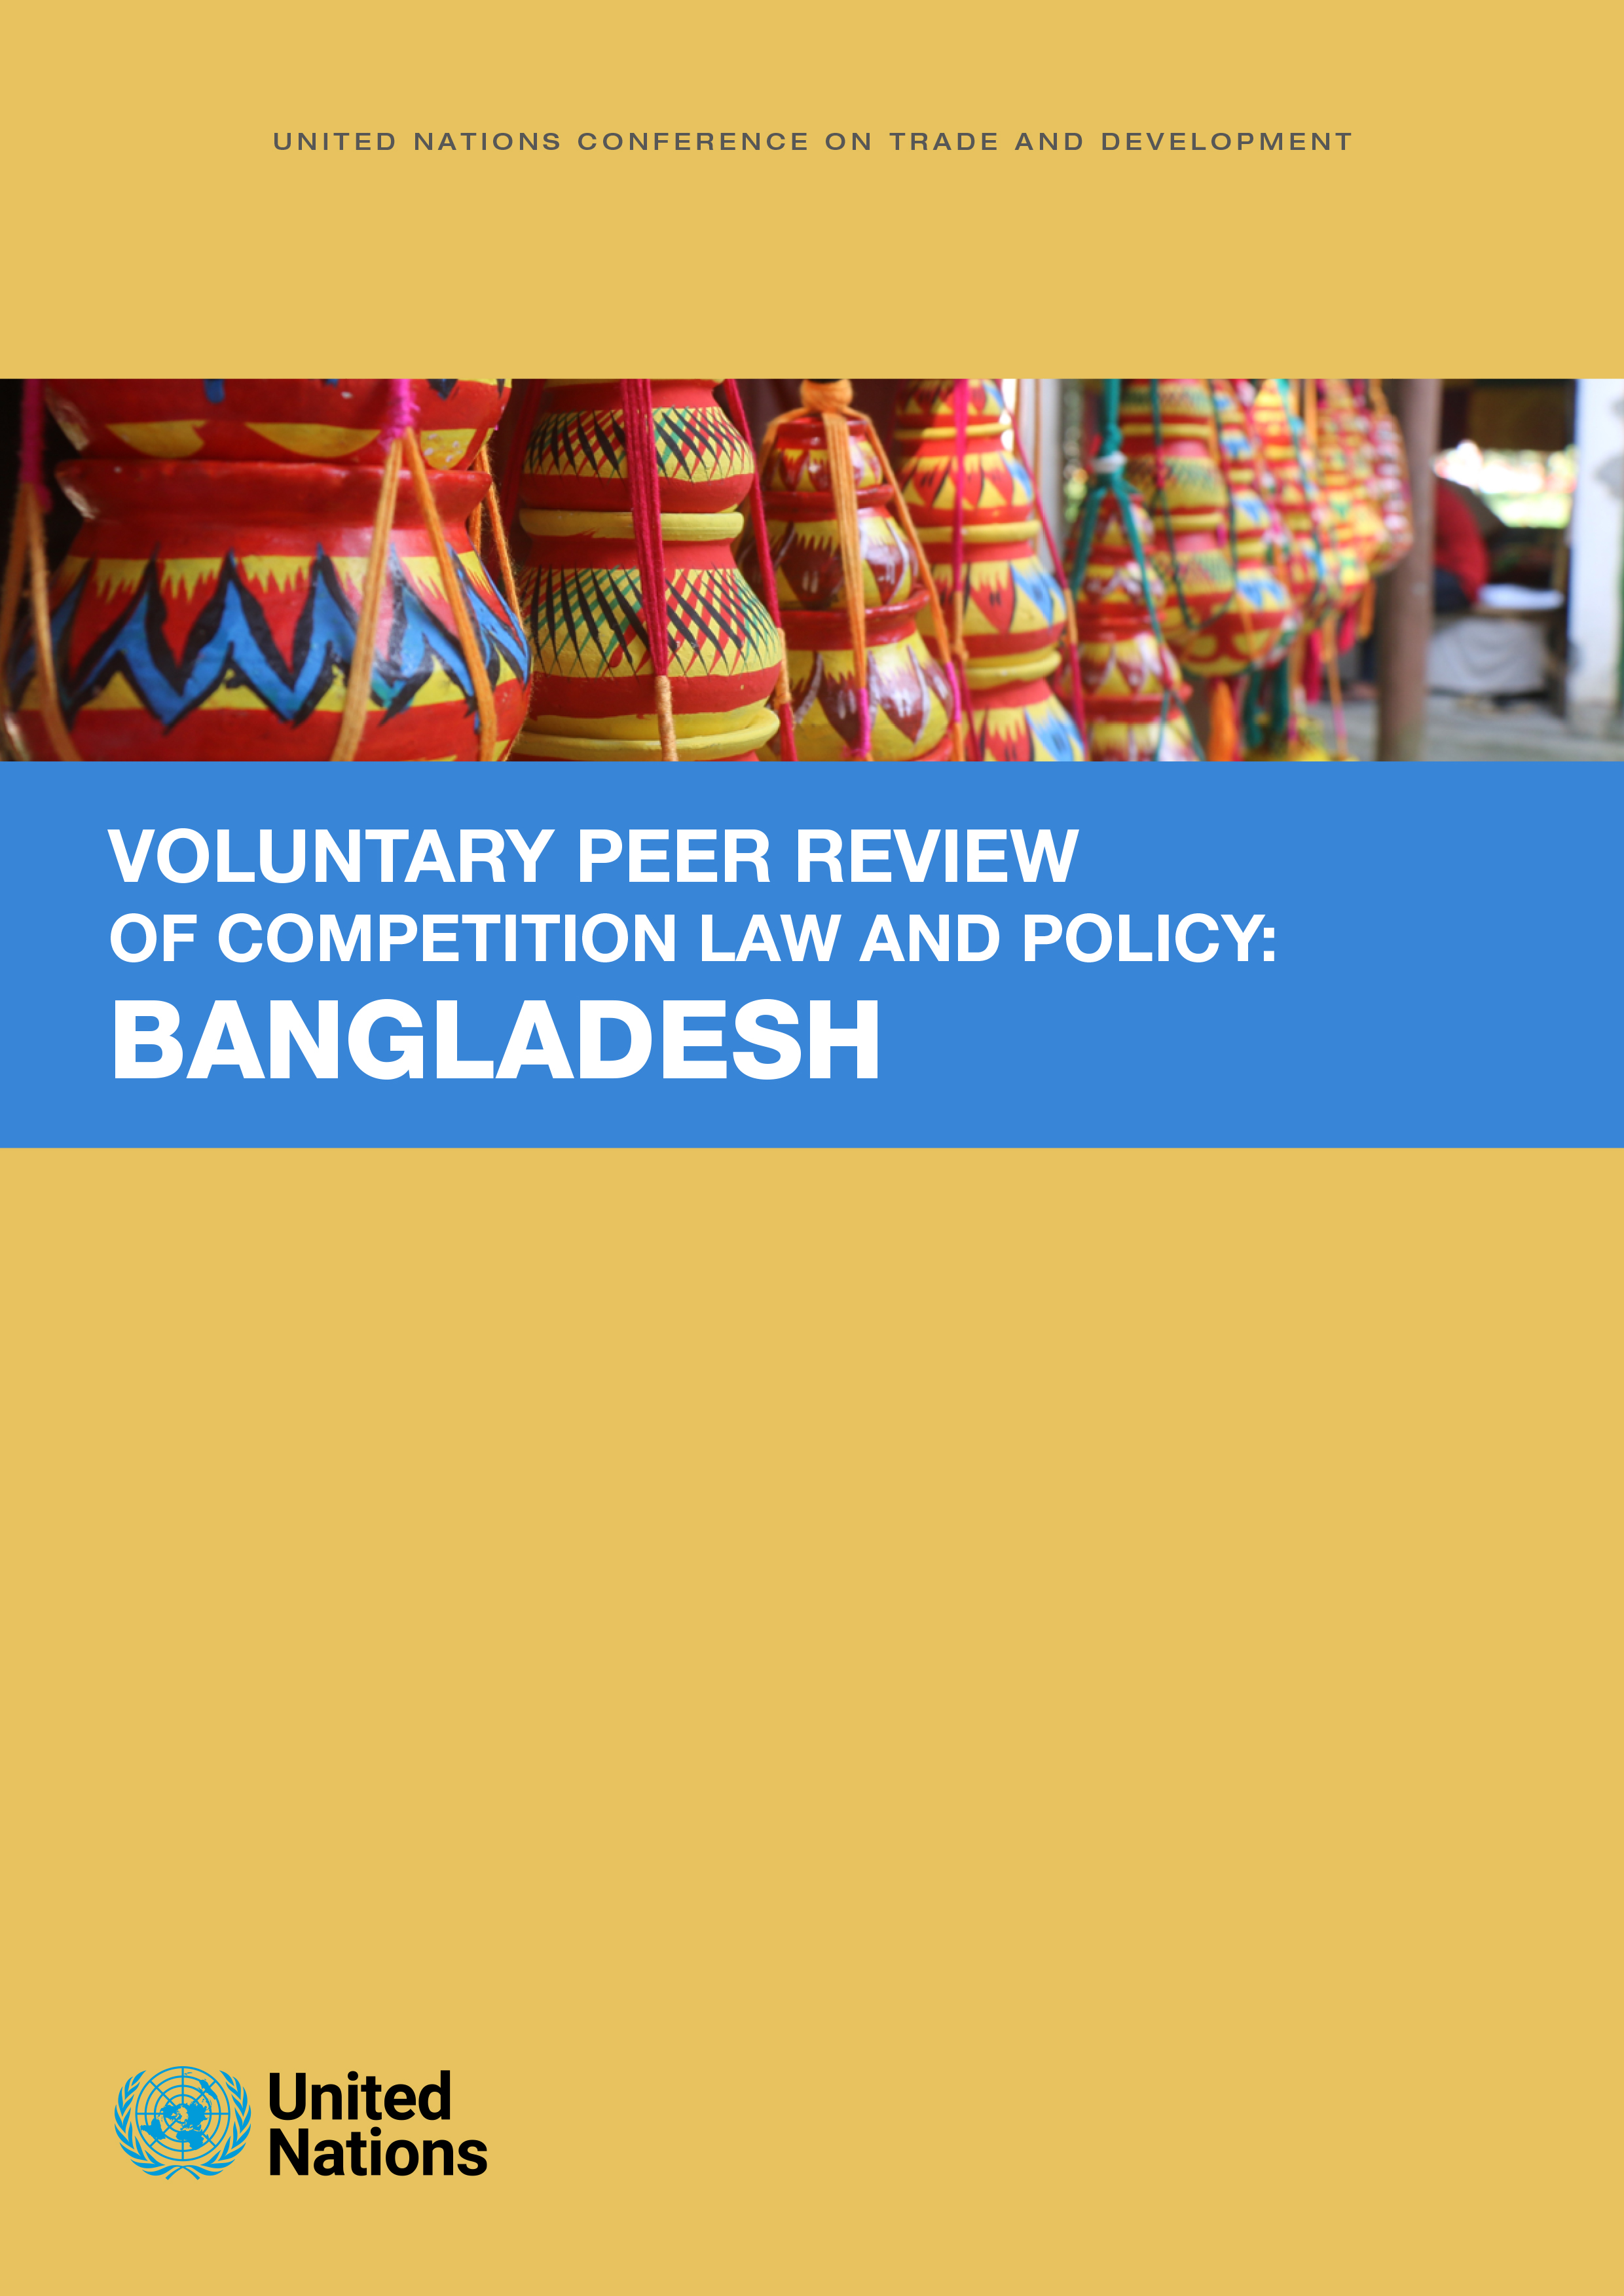 image of Voluntary Peer Review of Competition Law and Policy - Bangladesh